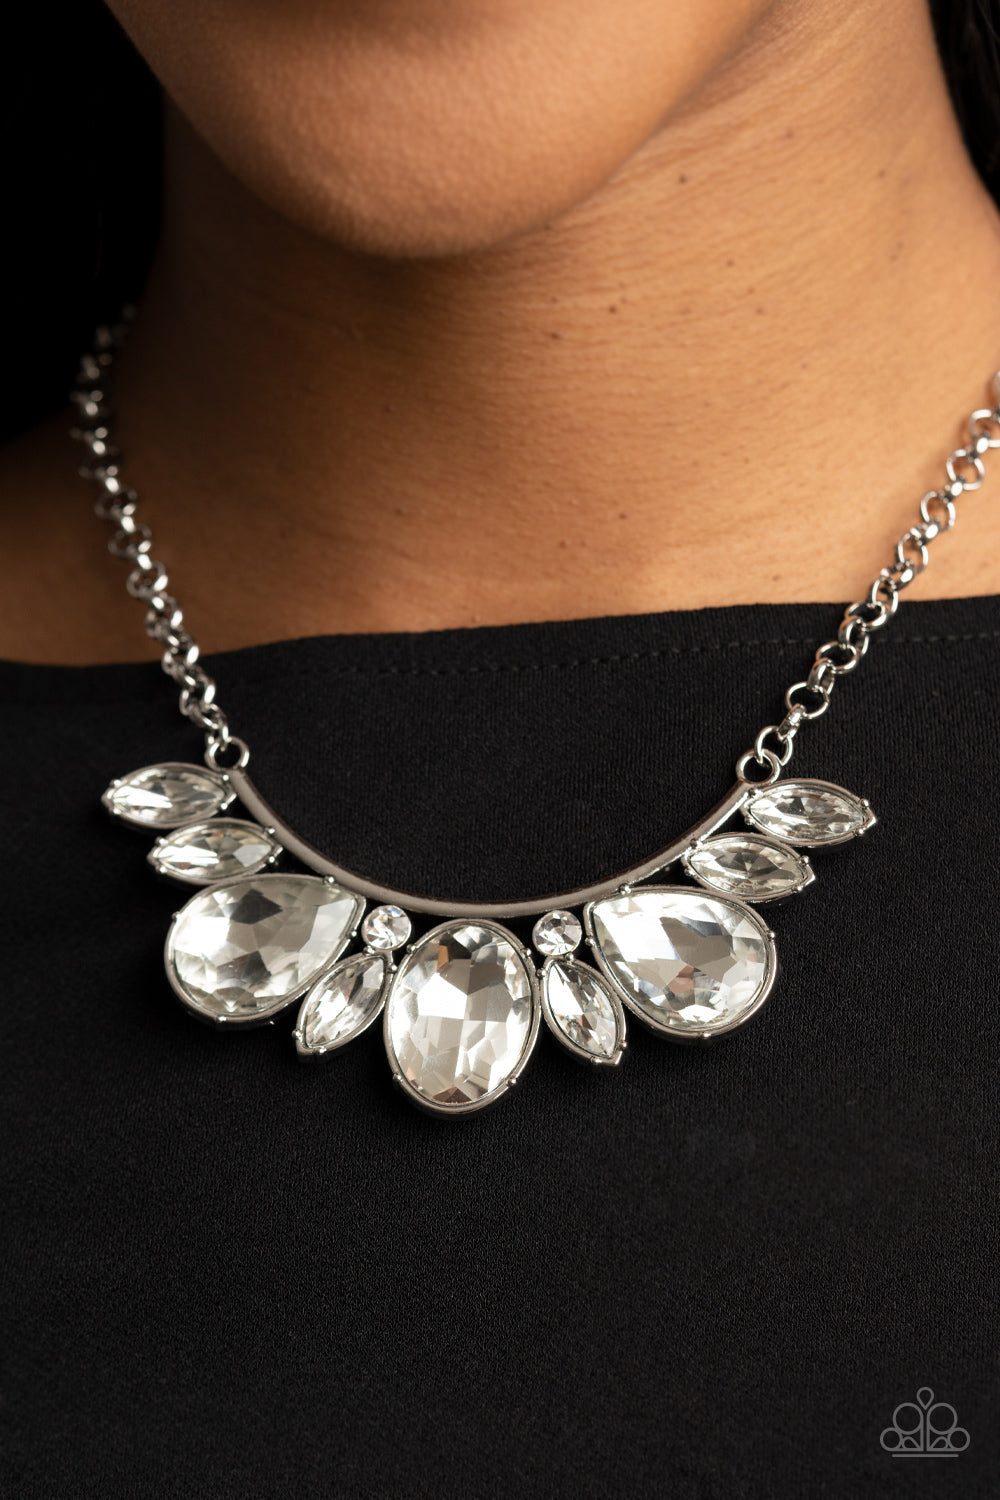 Never SLAY Never - White and Silver Necklace - Paparazzi Accessories - An oversized collection of round, marquise, and teardrop white rhinestones drip from the bottom of a bowing silver bar, coalescing into a sassy statement piece below the collar. Features an adjustable clasp closure.